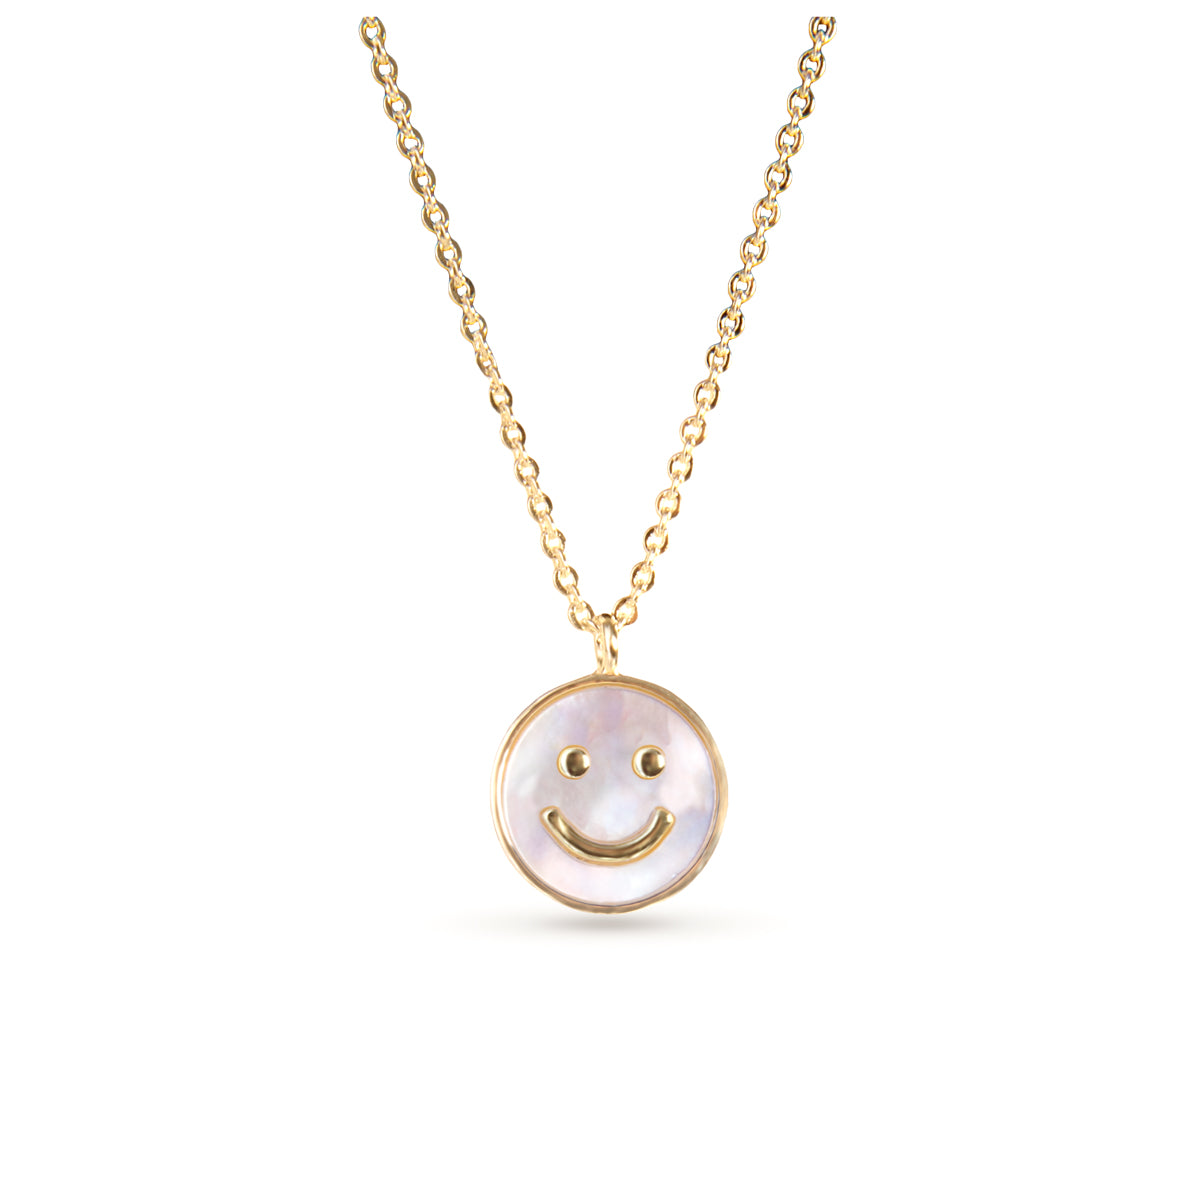 Mother of Pearl Smiley Face Necklace - Gold